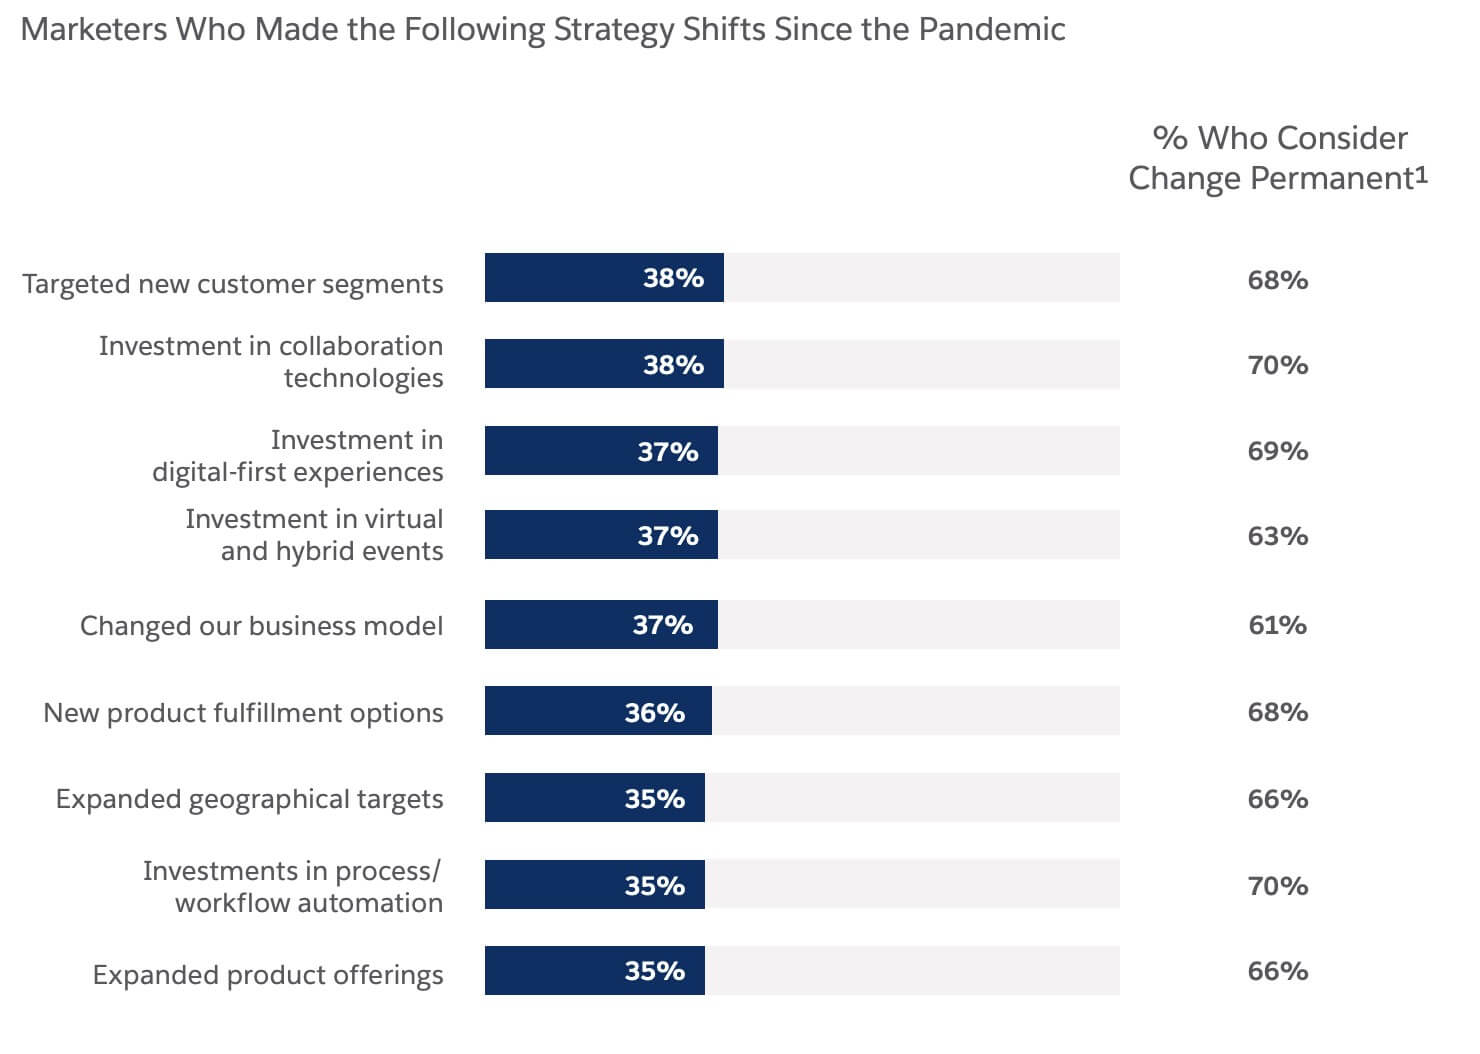 How Ecommerce Organizations Can Find Optimism in 2023 Amid Technological Change 3